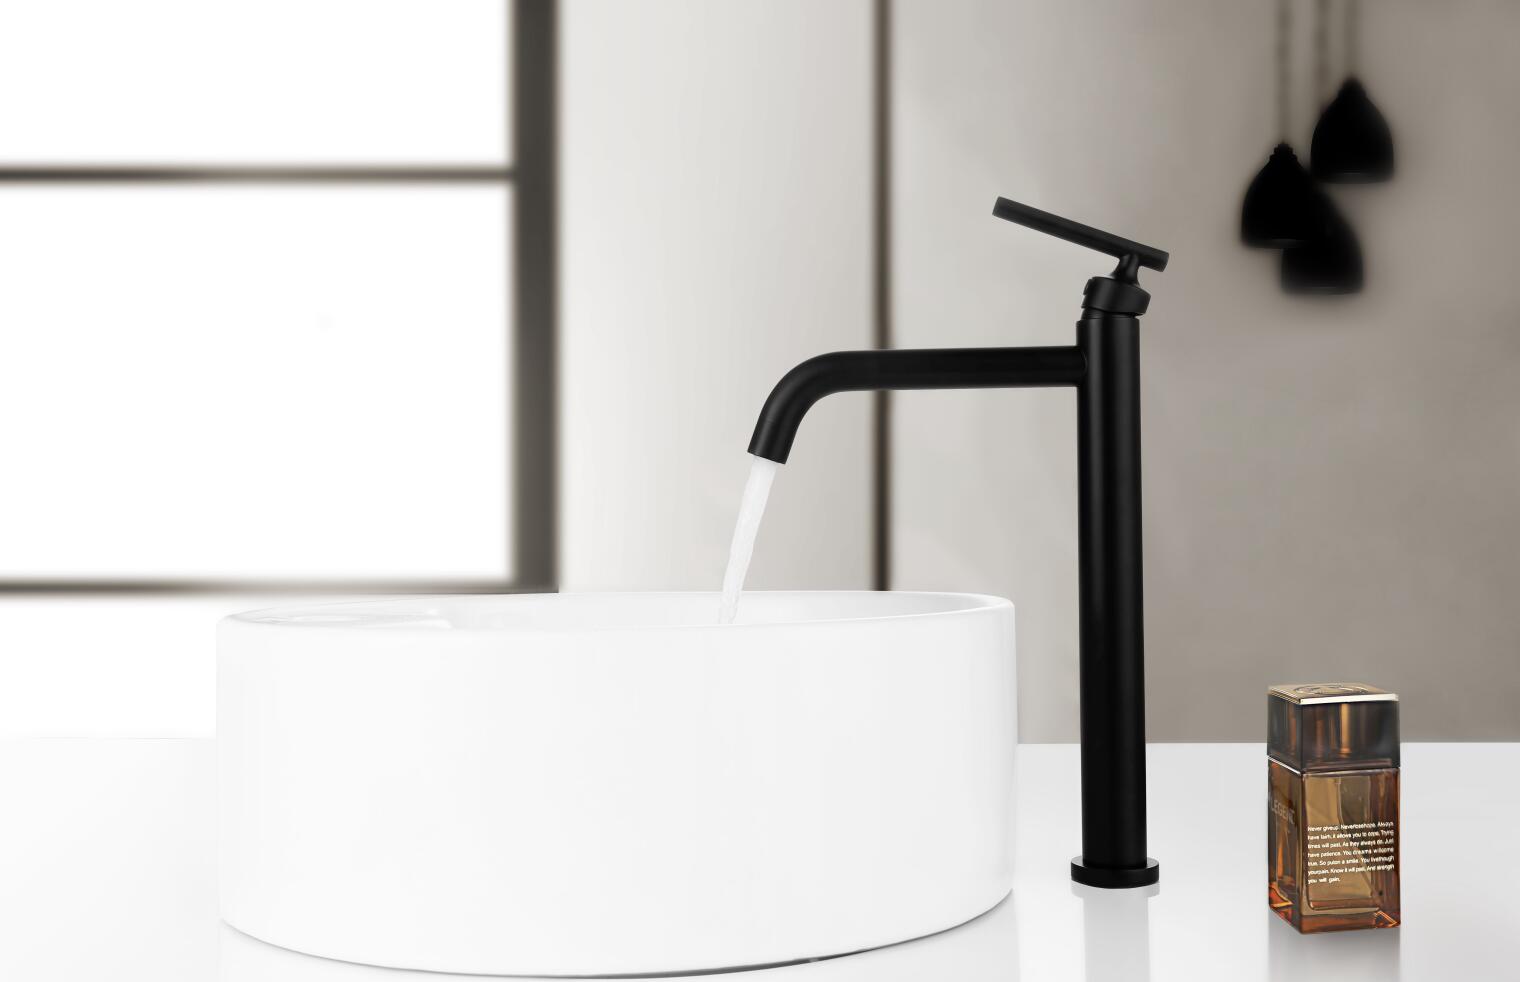 Several misunderstandings on the purchasing of faucets